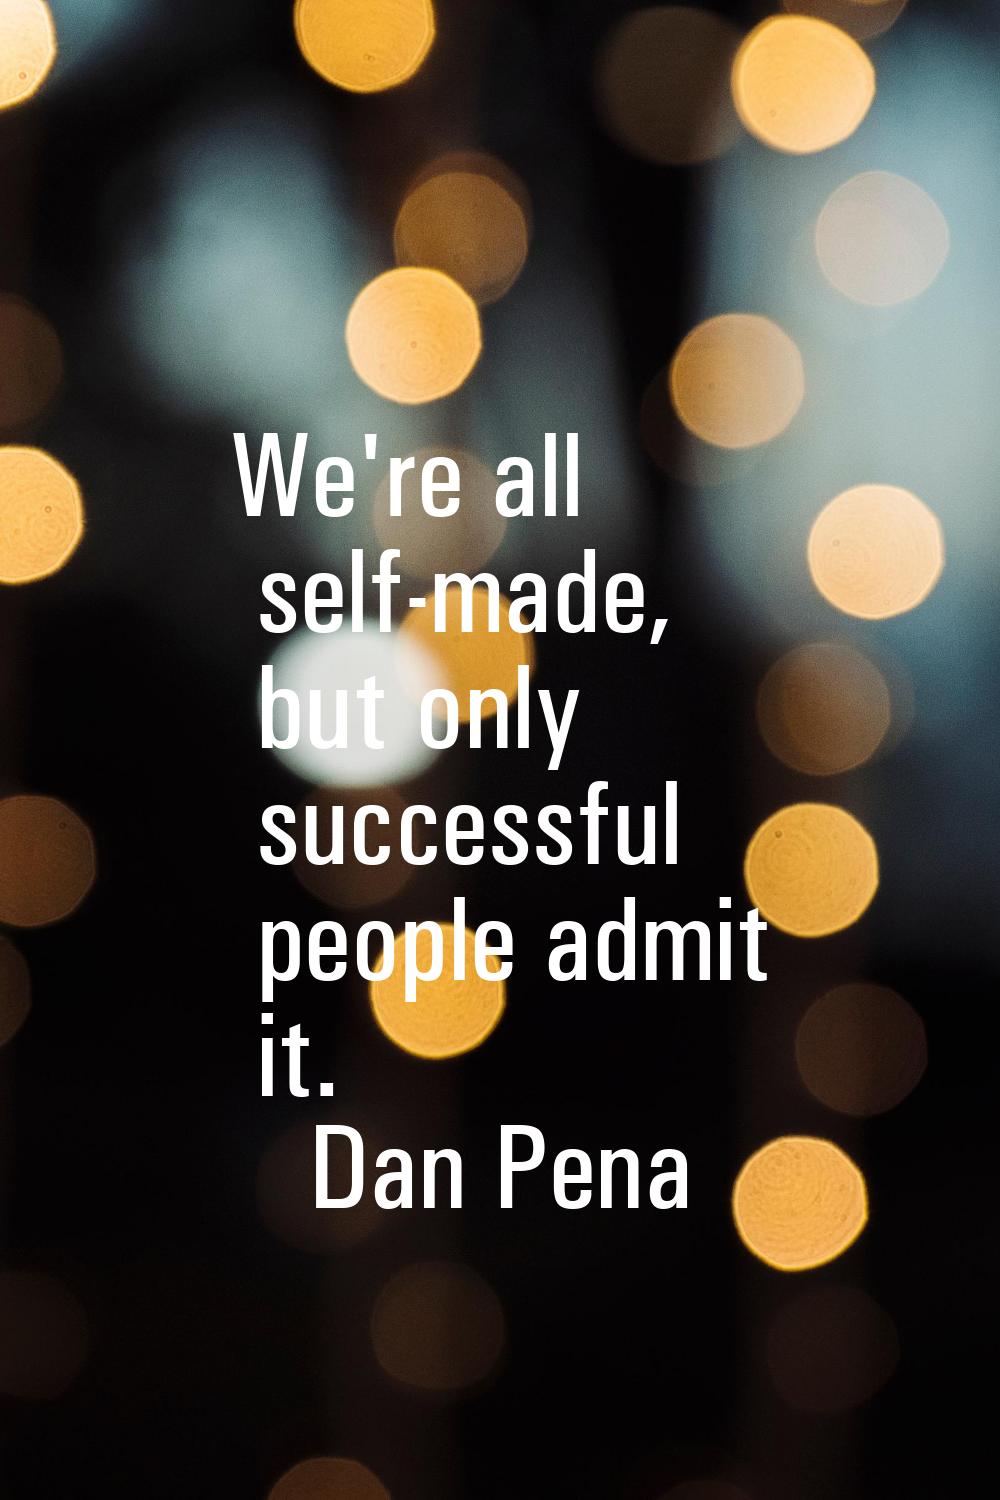 We're all self-made, but only successful people admit it.